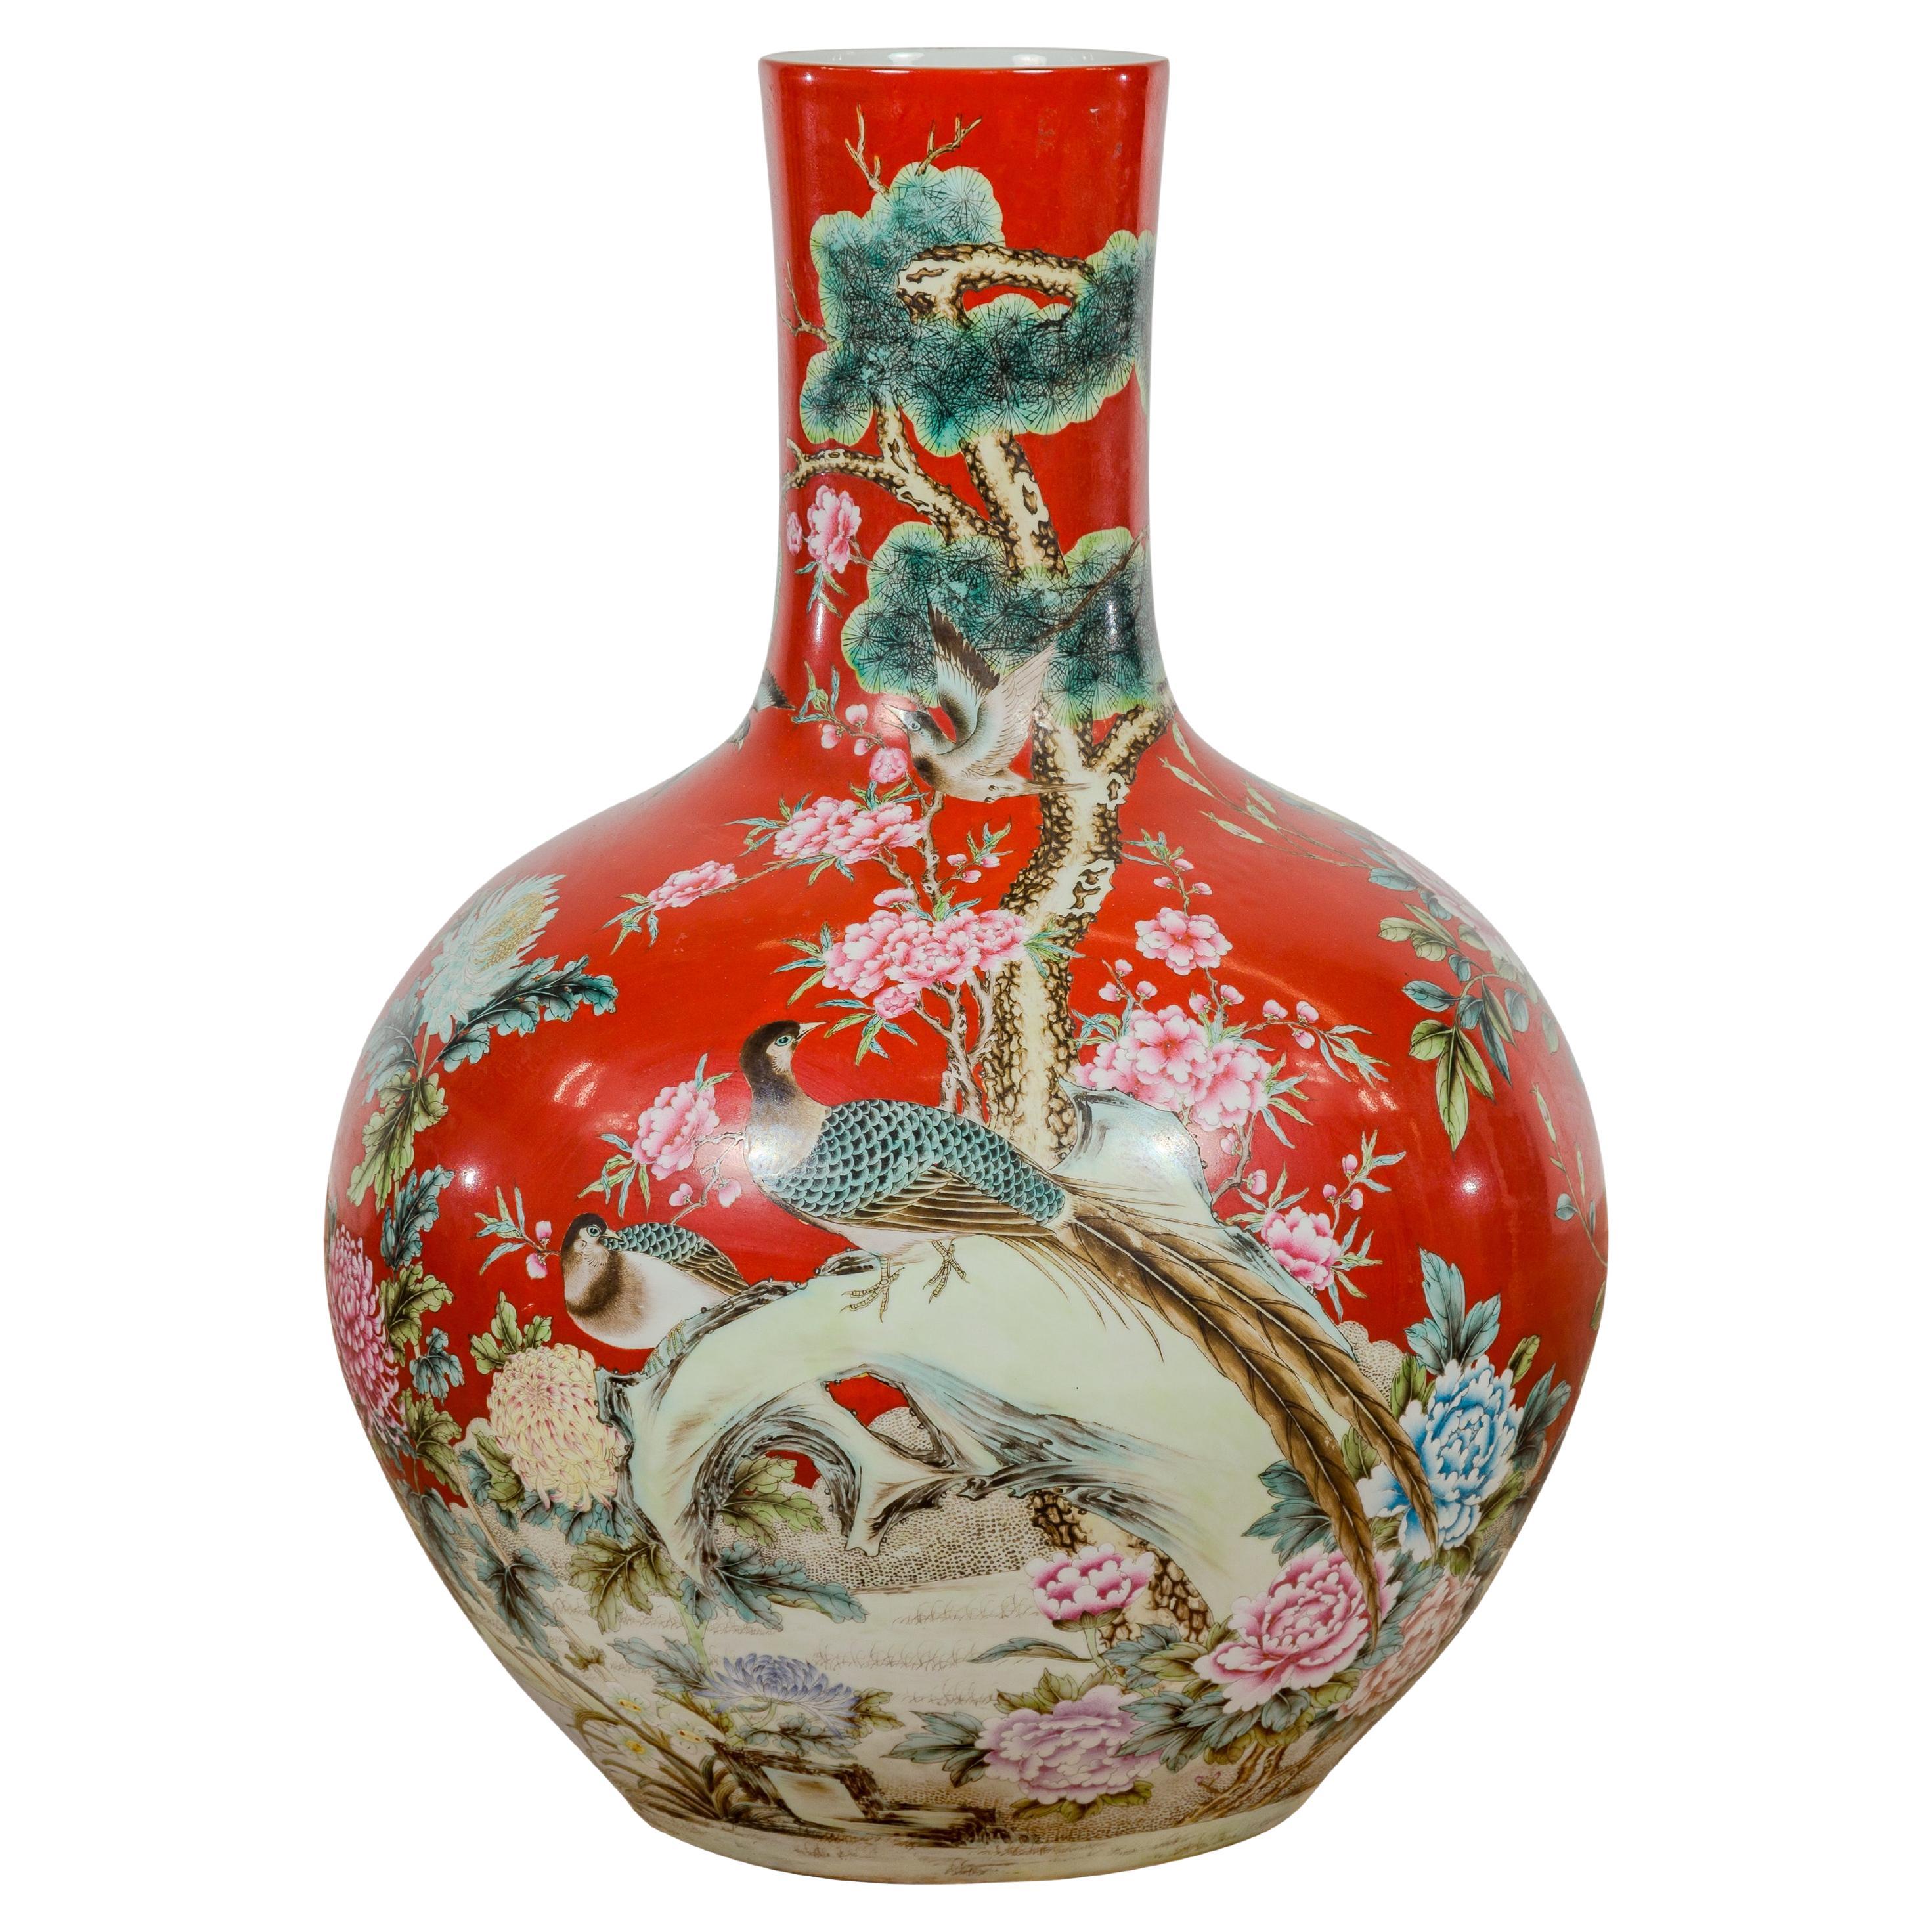 Kendi Style Midcentury Red Porcelain Vase with Hand-Painted Birds and Flowers For Sale